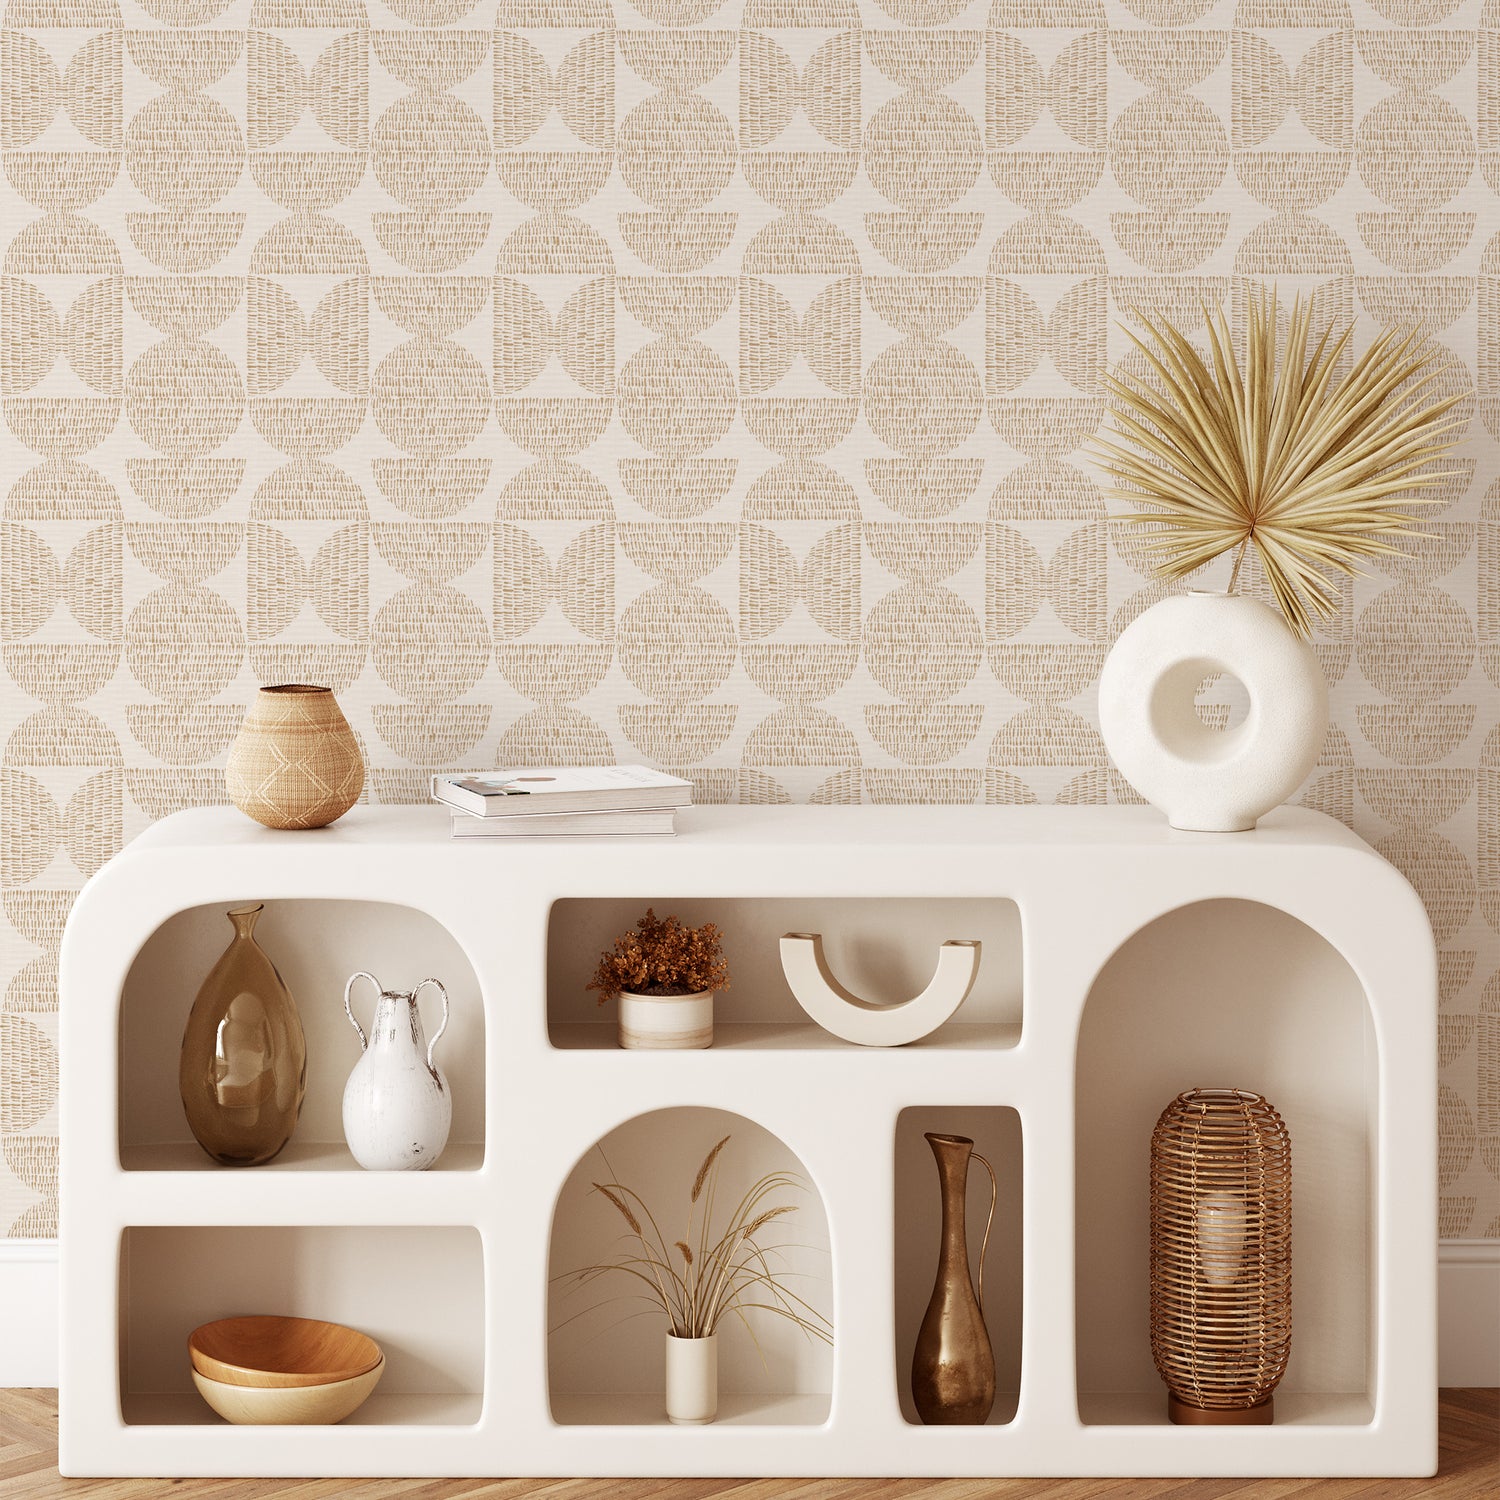 Go crazy with circles! Get yourself these stylish Half Circle Blocks Wallpapers for a unique wall decor solution. With its beige-on-cream design, these geometric wallpapers will easily liven up any room, making it look modern and chic. Circle up and add a bit of life to your walls!